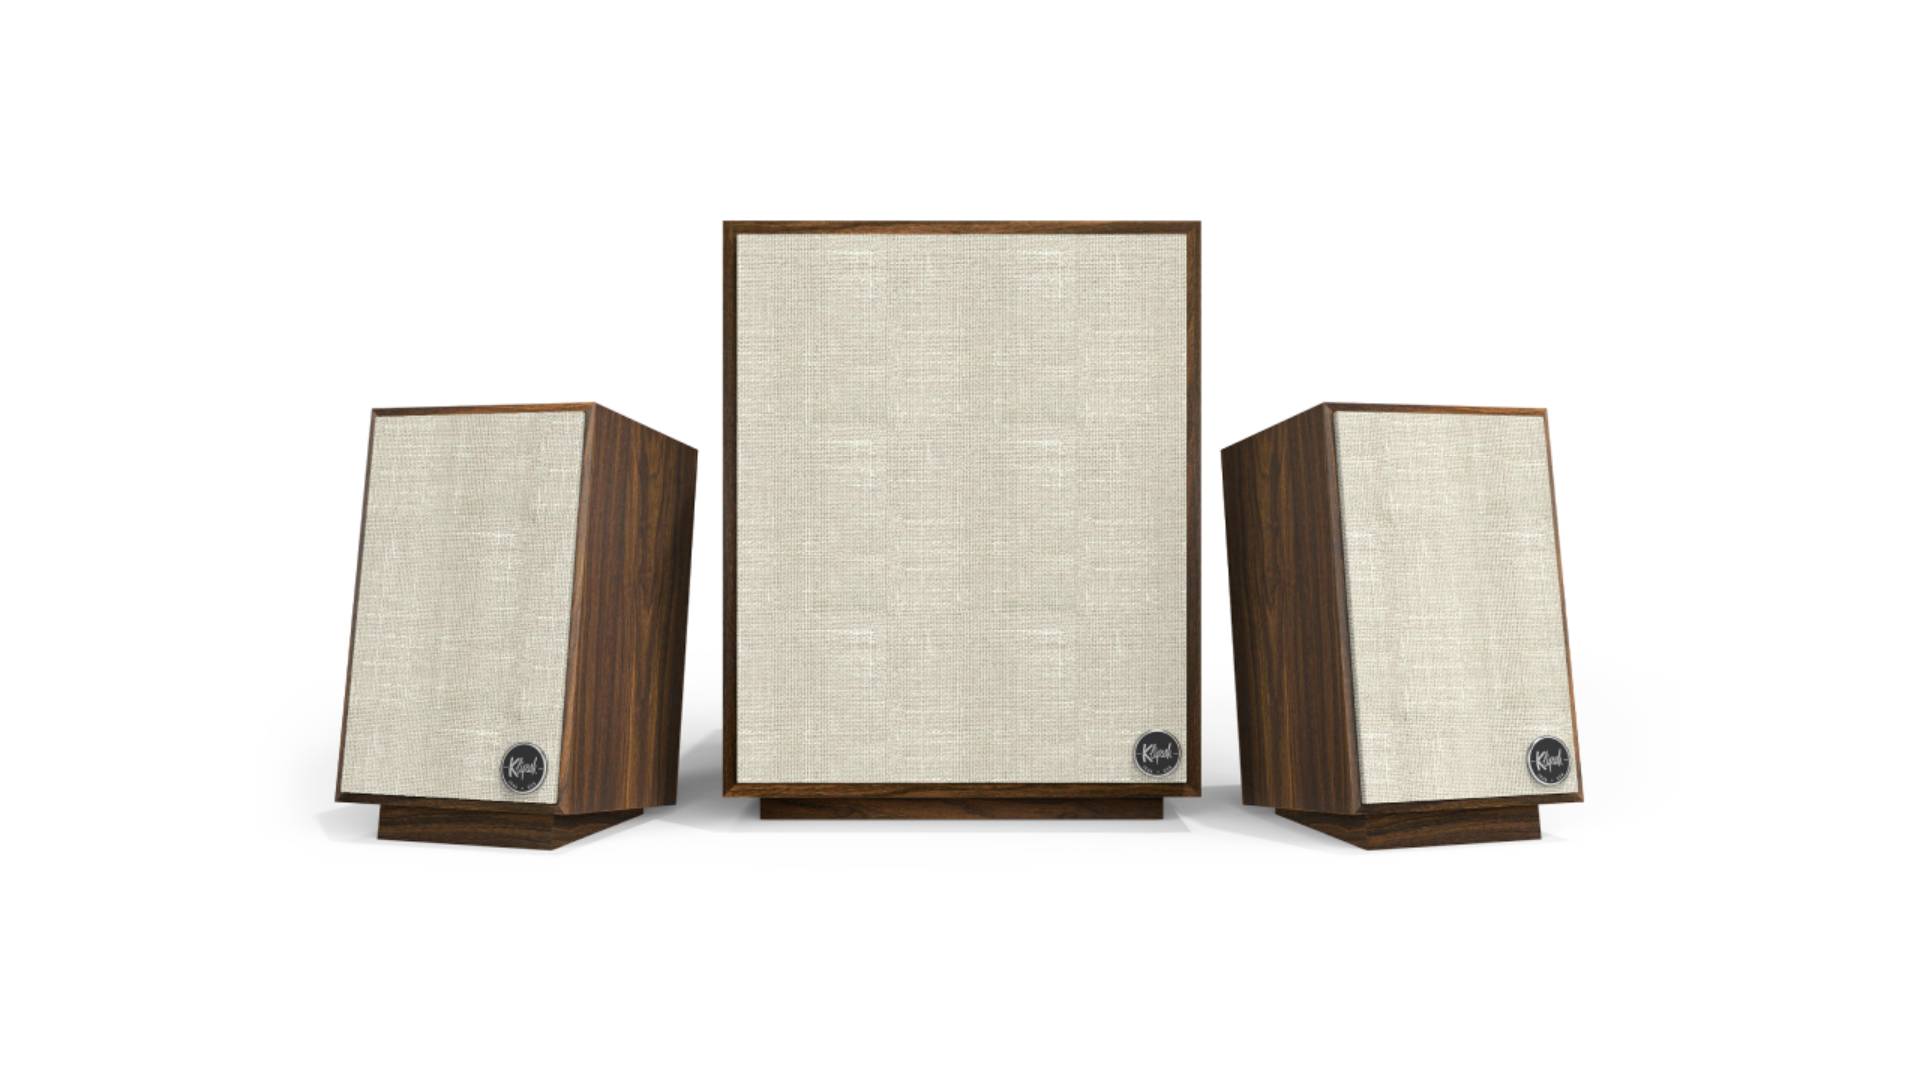 Klipsch unveils R-40PM and R-50PM powered speakers